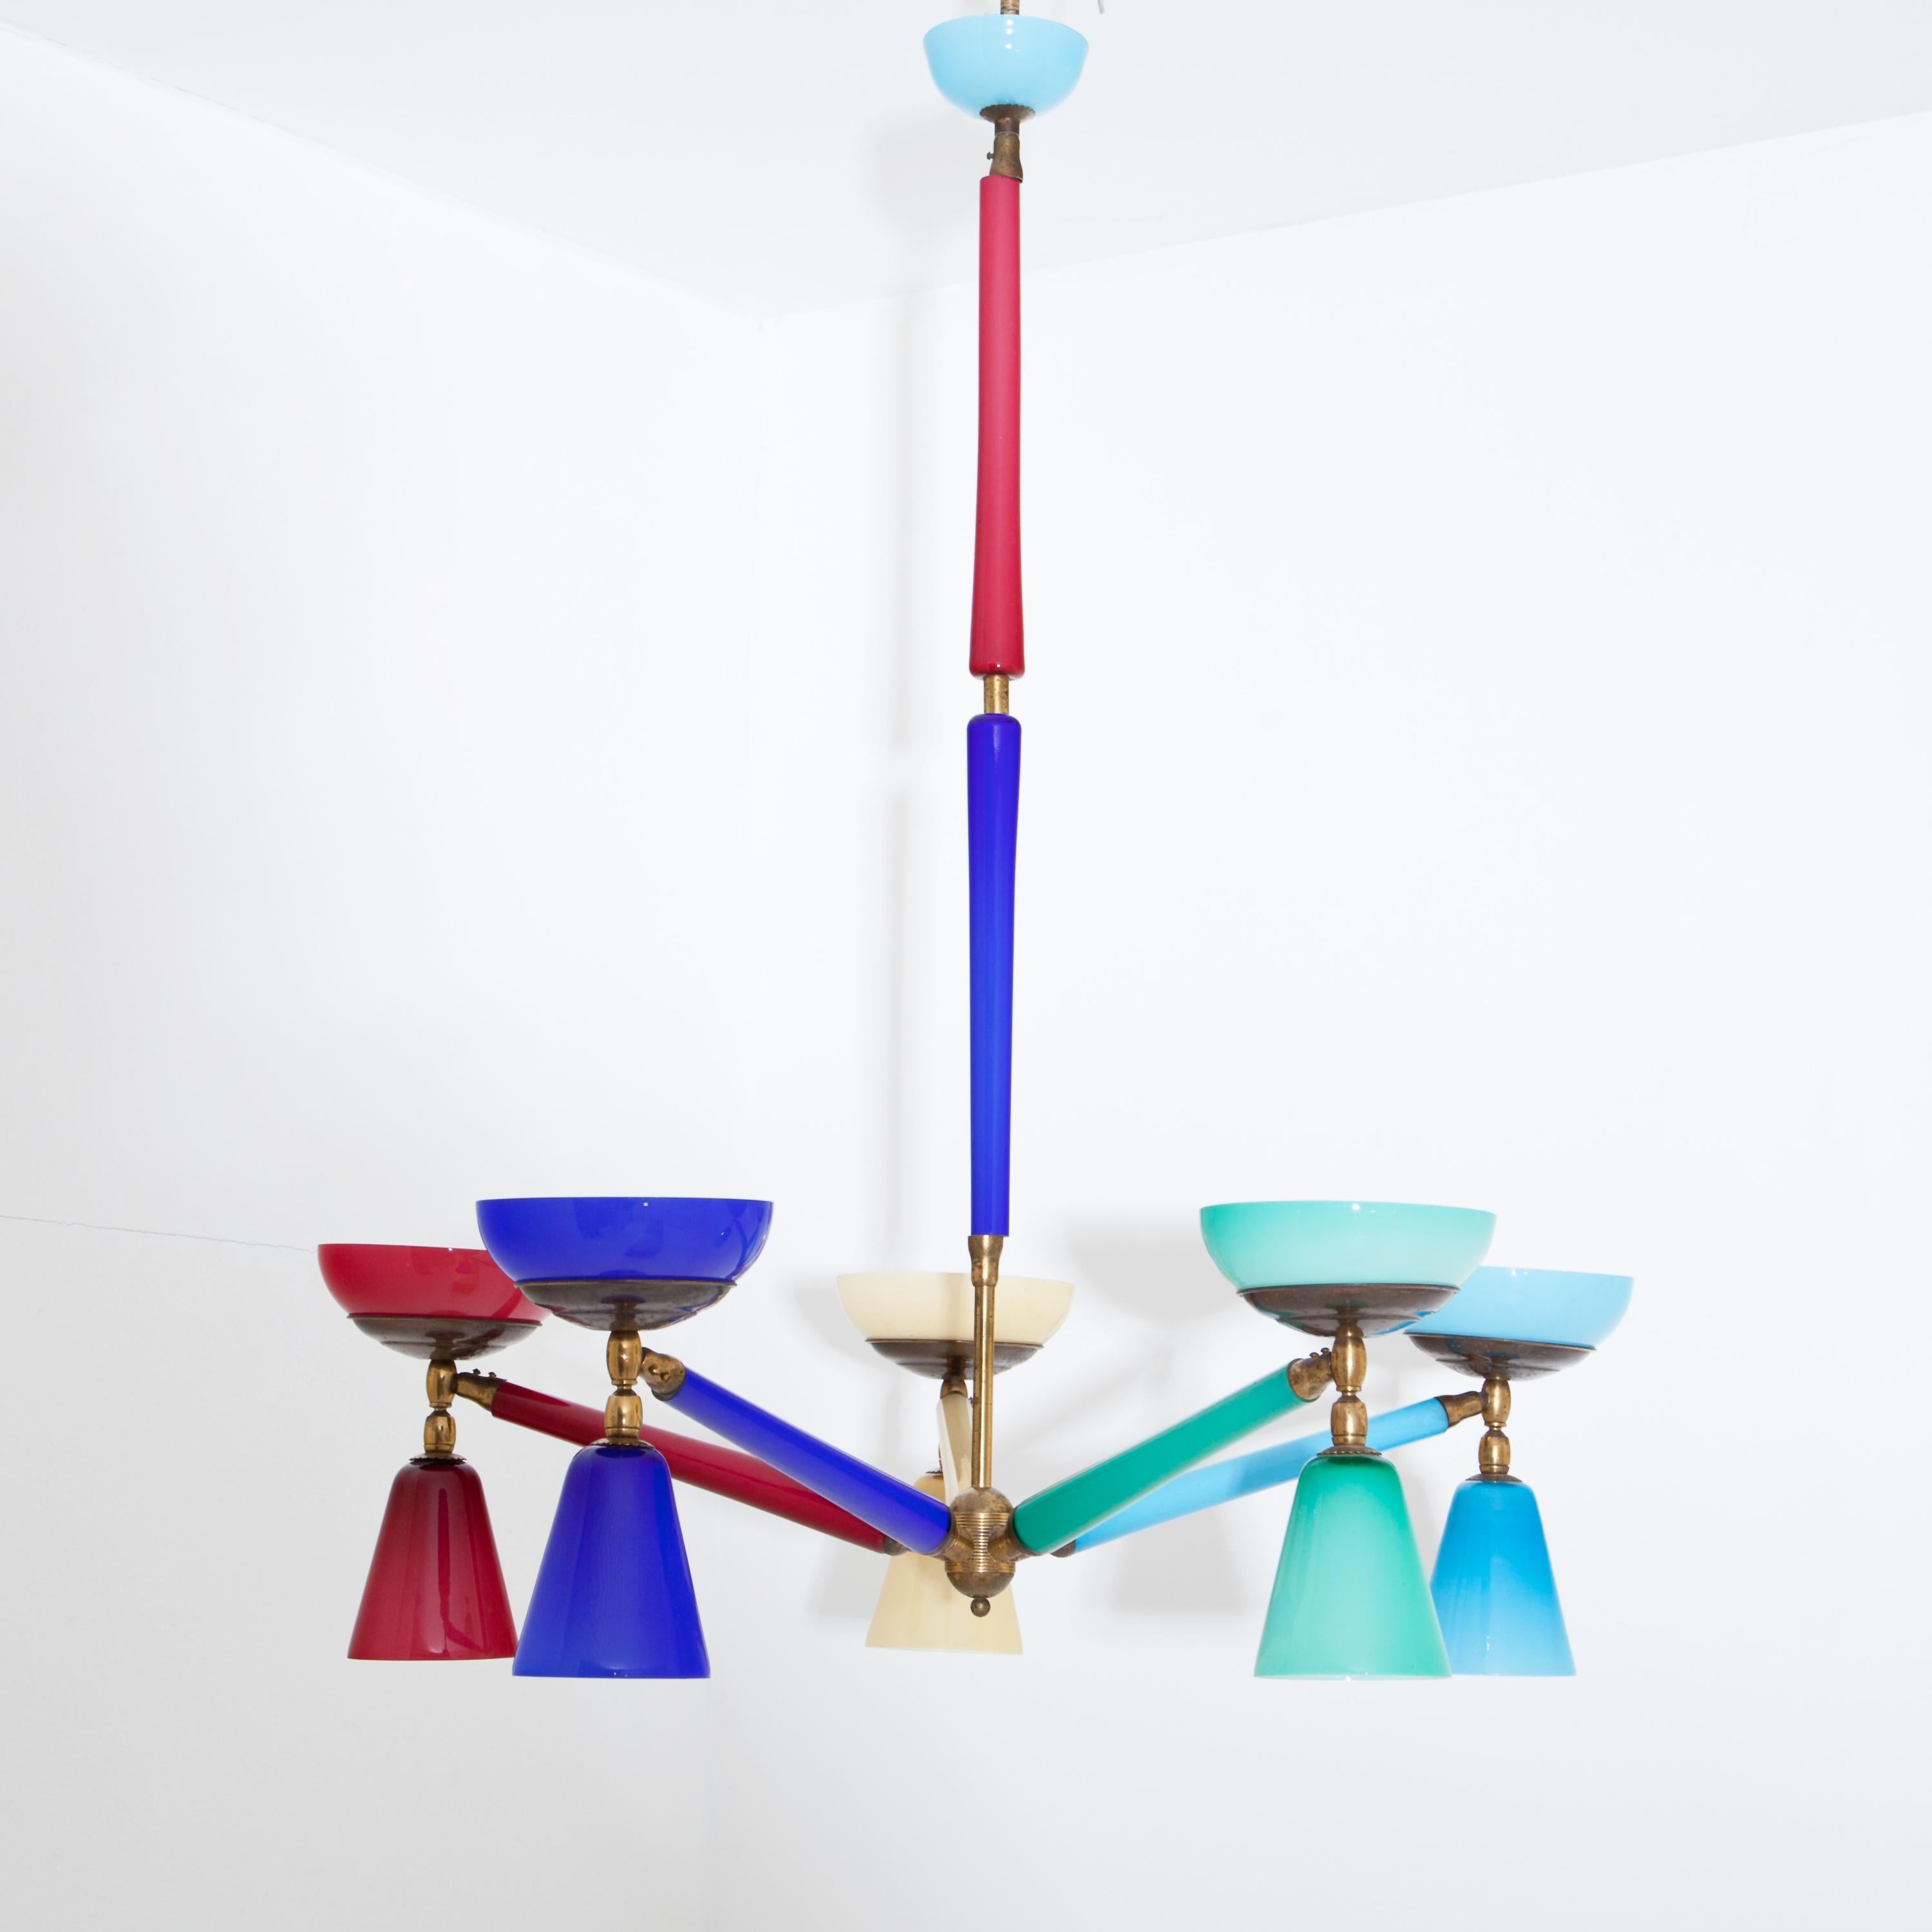 Five-armed colorful Murano glass ceiling chandelier with conical or bowl-shaped lampshades. Each arm is grouped in a different color around the brass rod with further glass elements. The ceiling rosette is in light blue. Some parts are restored. For